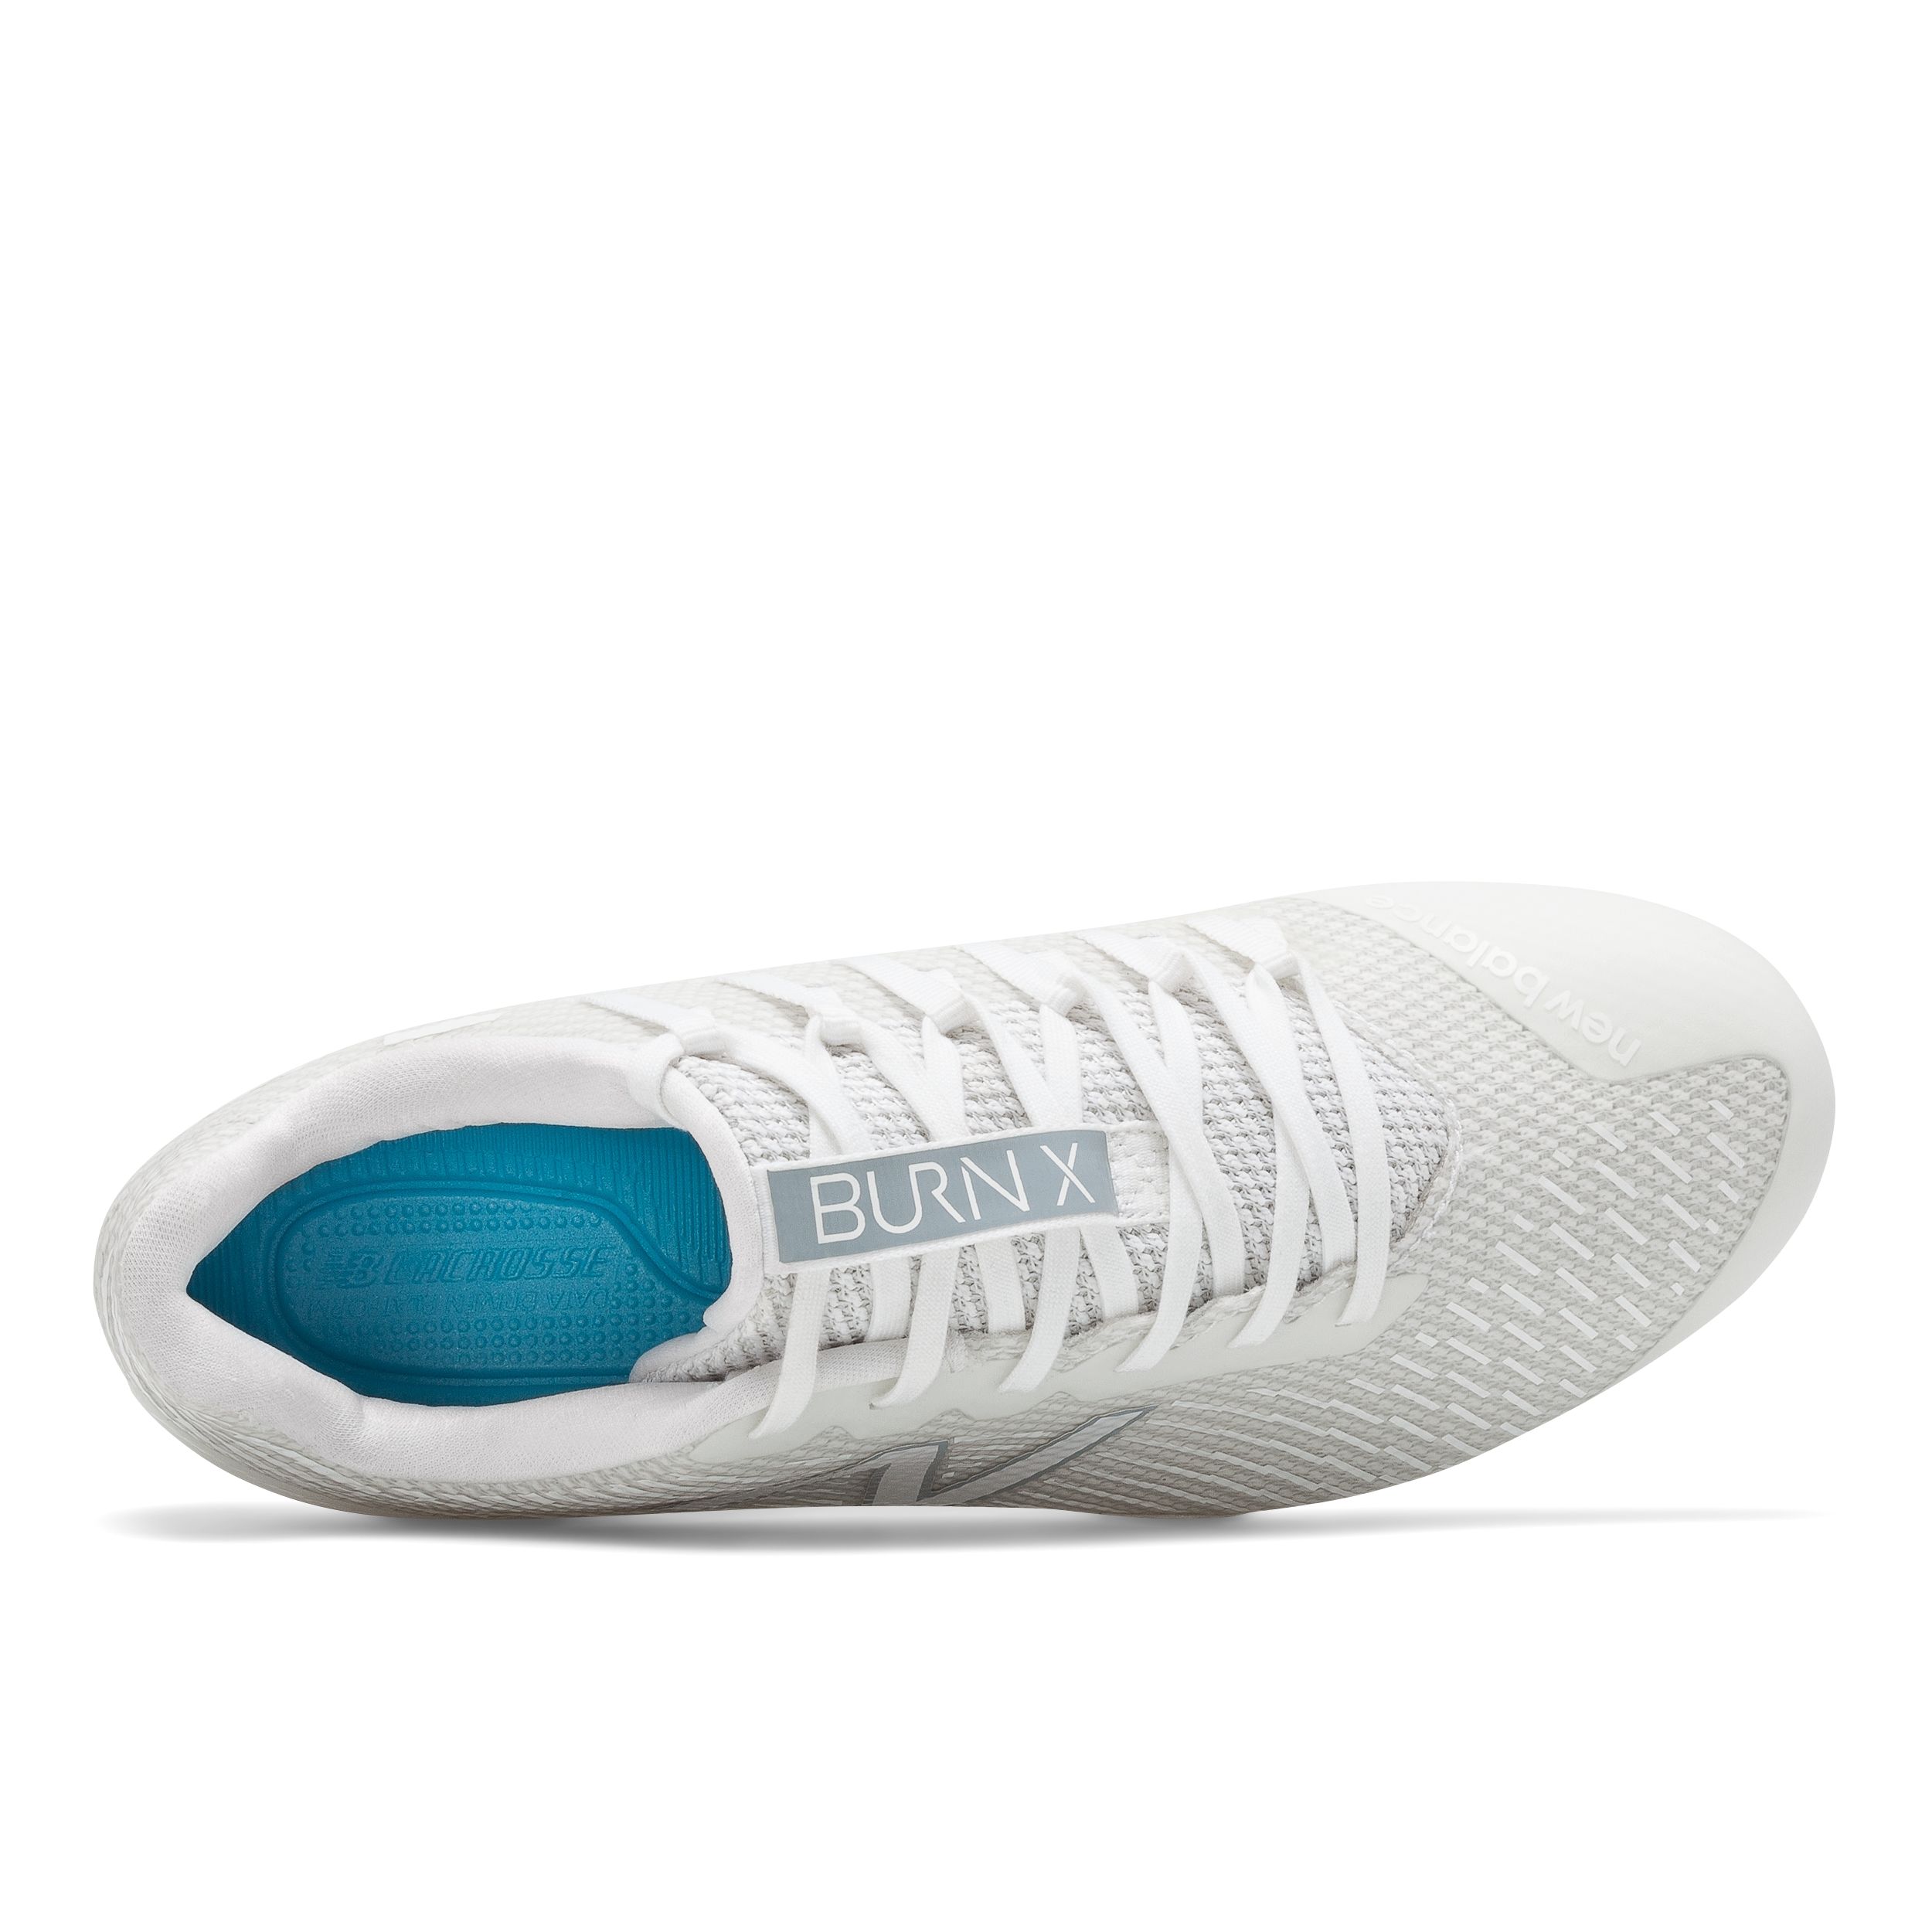 Women's Burn Low CLeat, White image number 2